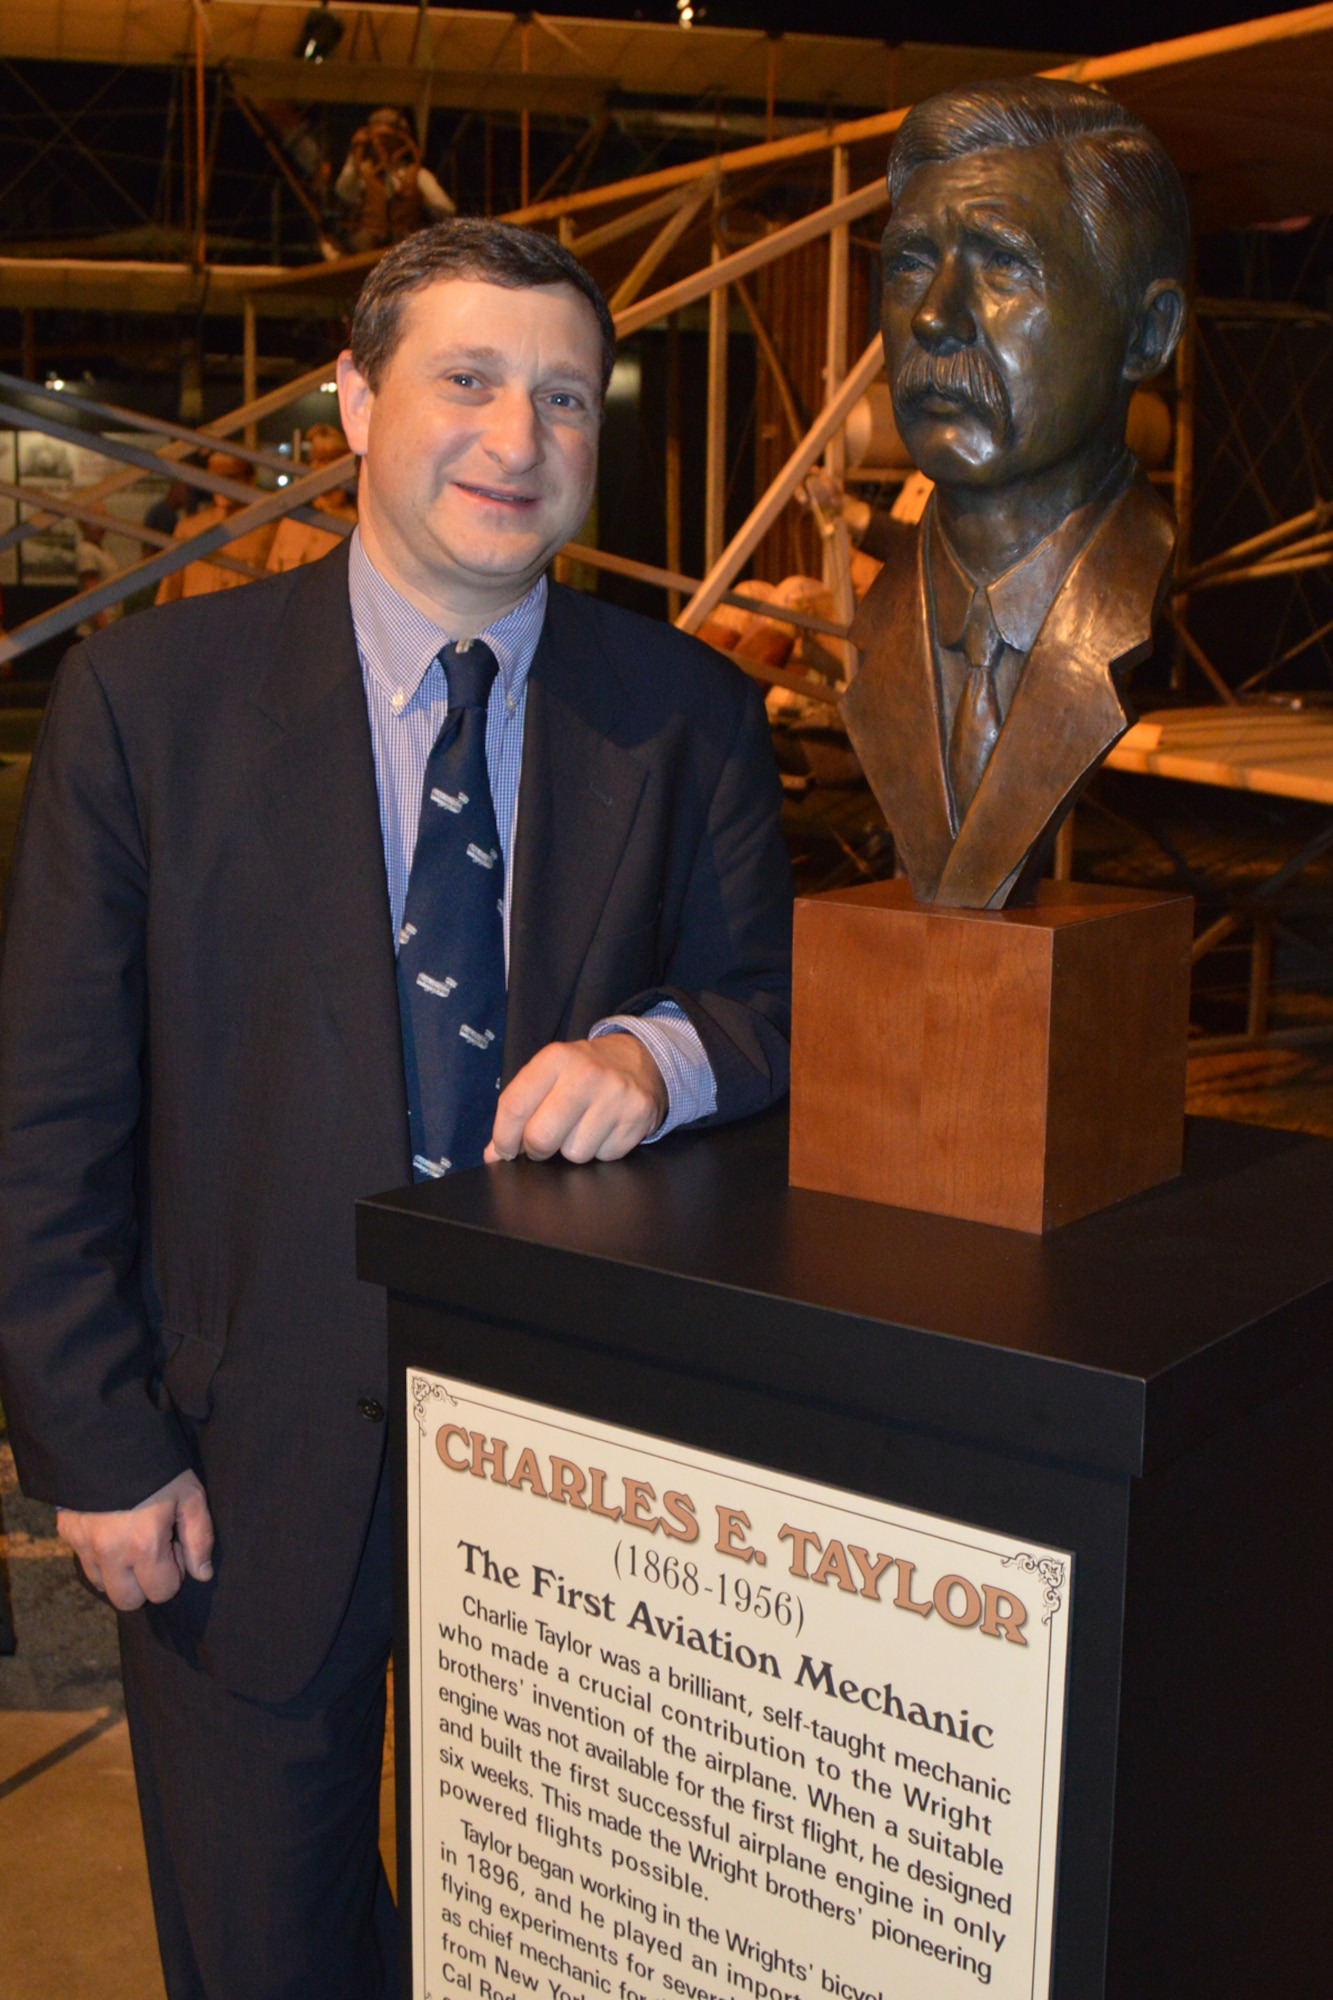 DAYTON, Ohio - Charles Taylor II, great-grandson of Charles E. Taylor, poses next to a bronze bust honoring his grandfather at the National Museum of the U.S. Air Force. Known as the first aviation mechanic, Charles E. Taylor designed and built the engine that made the Wright brothers' pioneering powered flights possible. (U.S. Air Force photo by Ken LaRock) 
